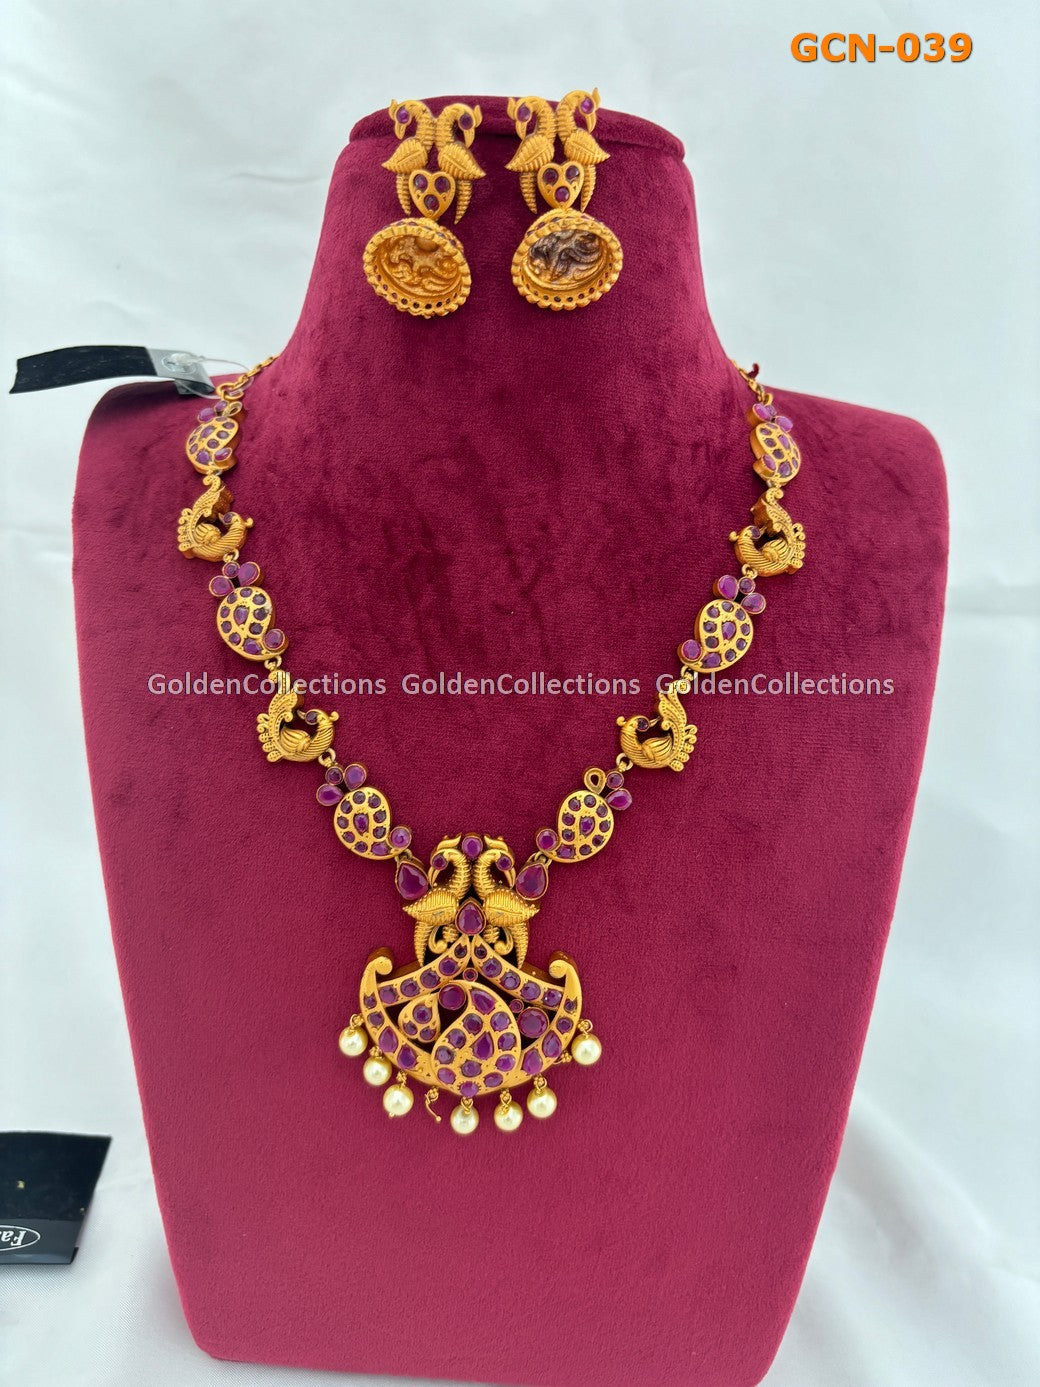 Wedding Gold Plated Necklace Design : Costume Jewelry Necklace GoldenCollections 